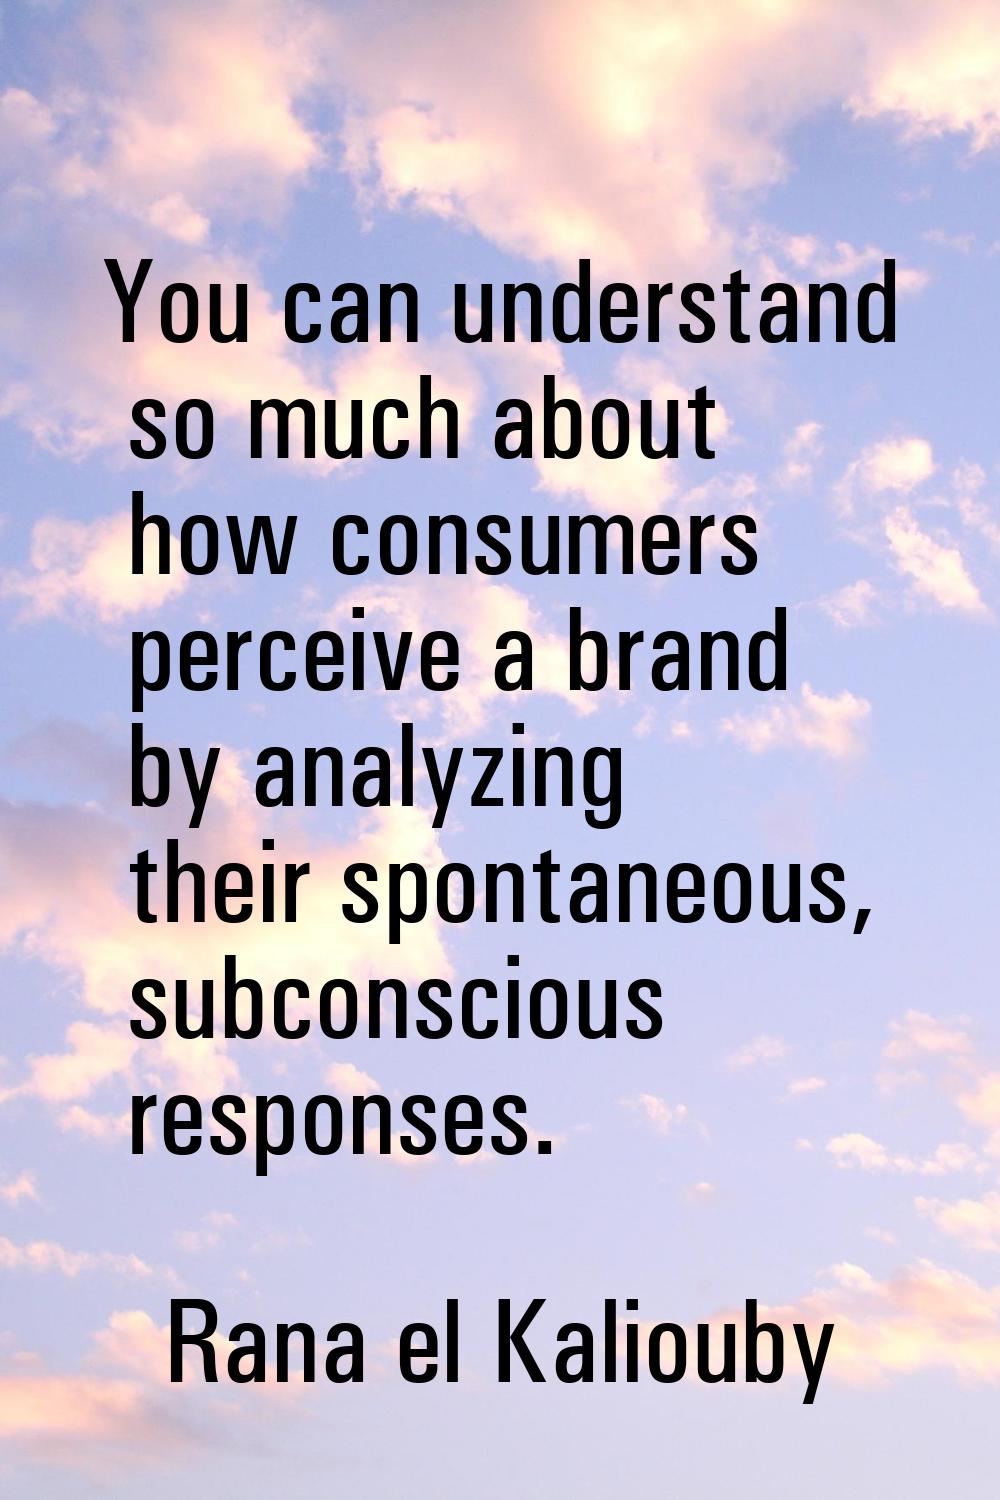 You can understand so much about how consumers perceive a brand by analyzing their spontaneous, sub